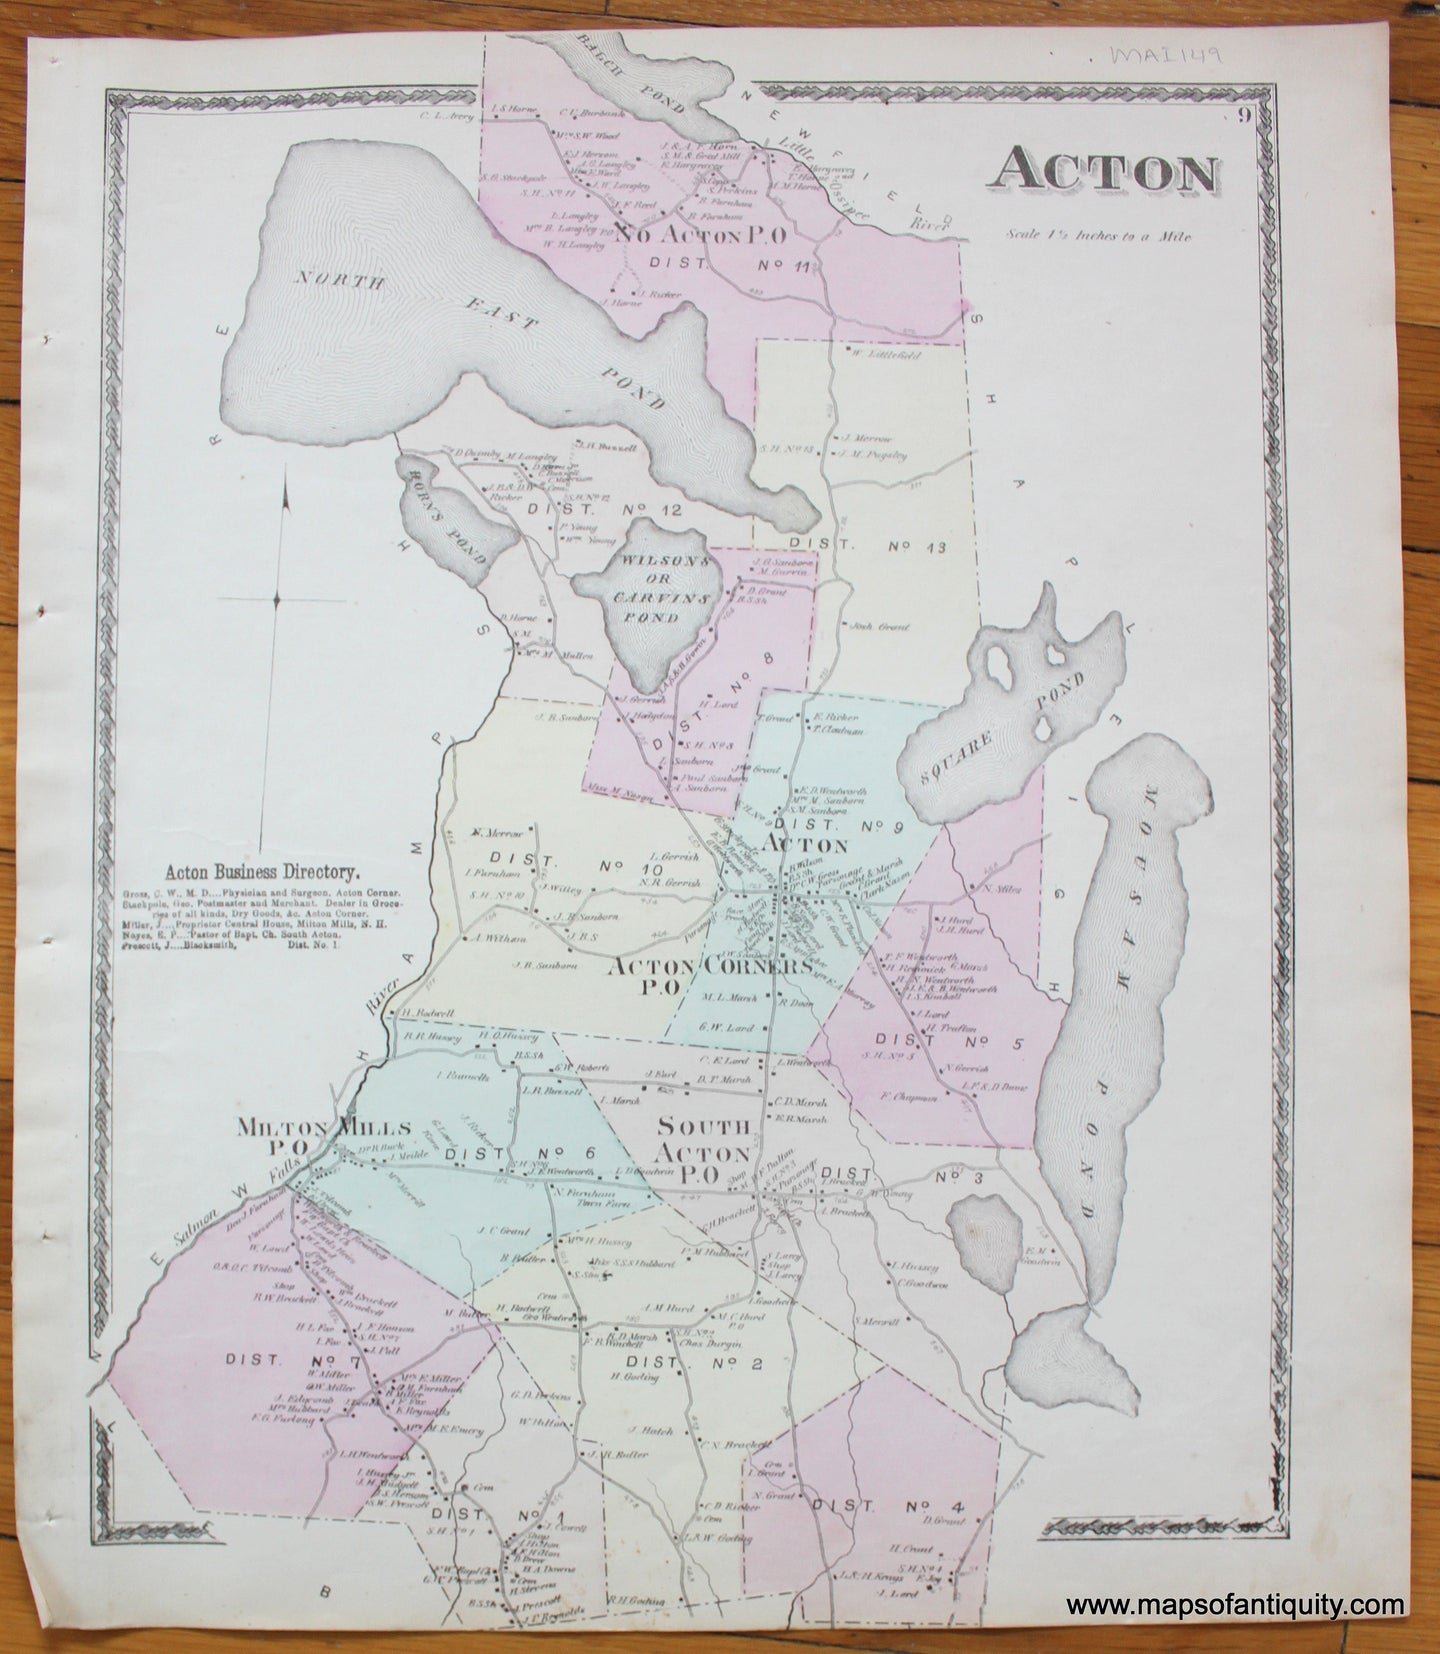 Acton-York-County-Maine-Antique-Map-1872-Sanford-Everts-1870s-1800s-19th-century-Maps-of-Antiquity